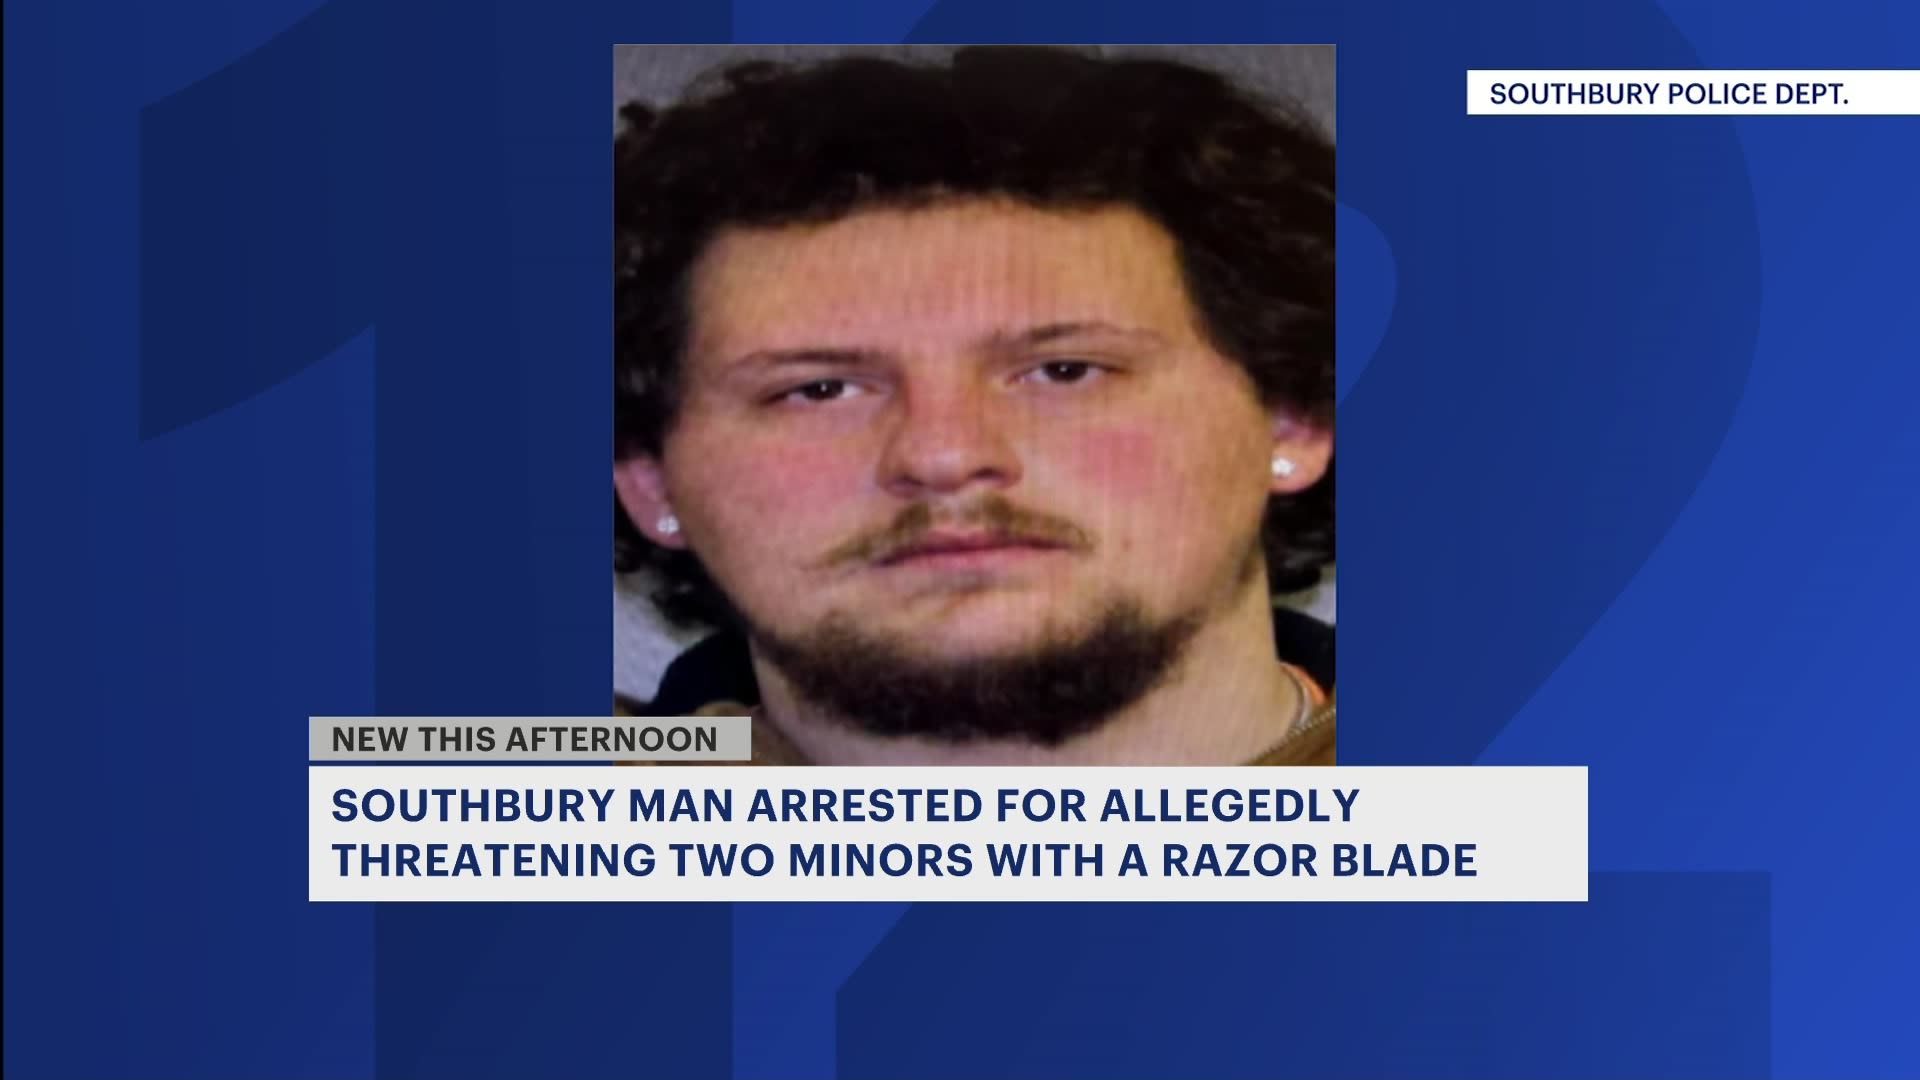 Police Southbury Man Arrested For Allegedly Threatening 2 Minors